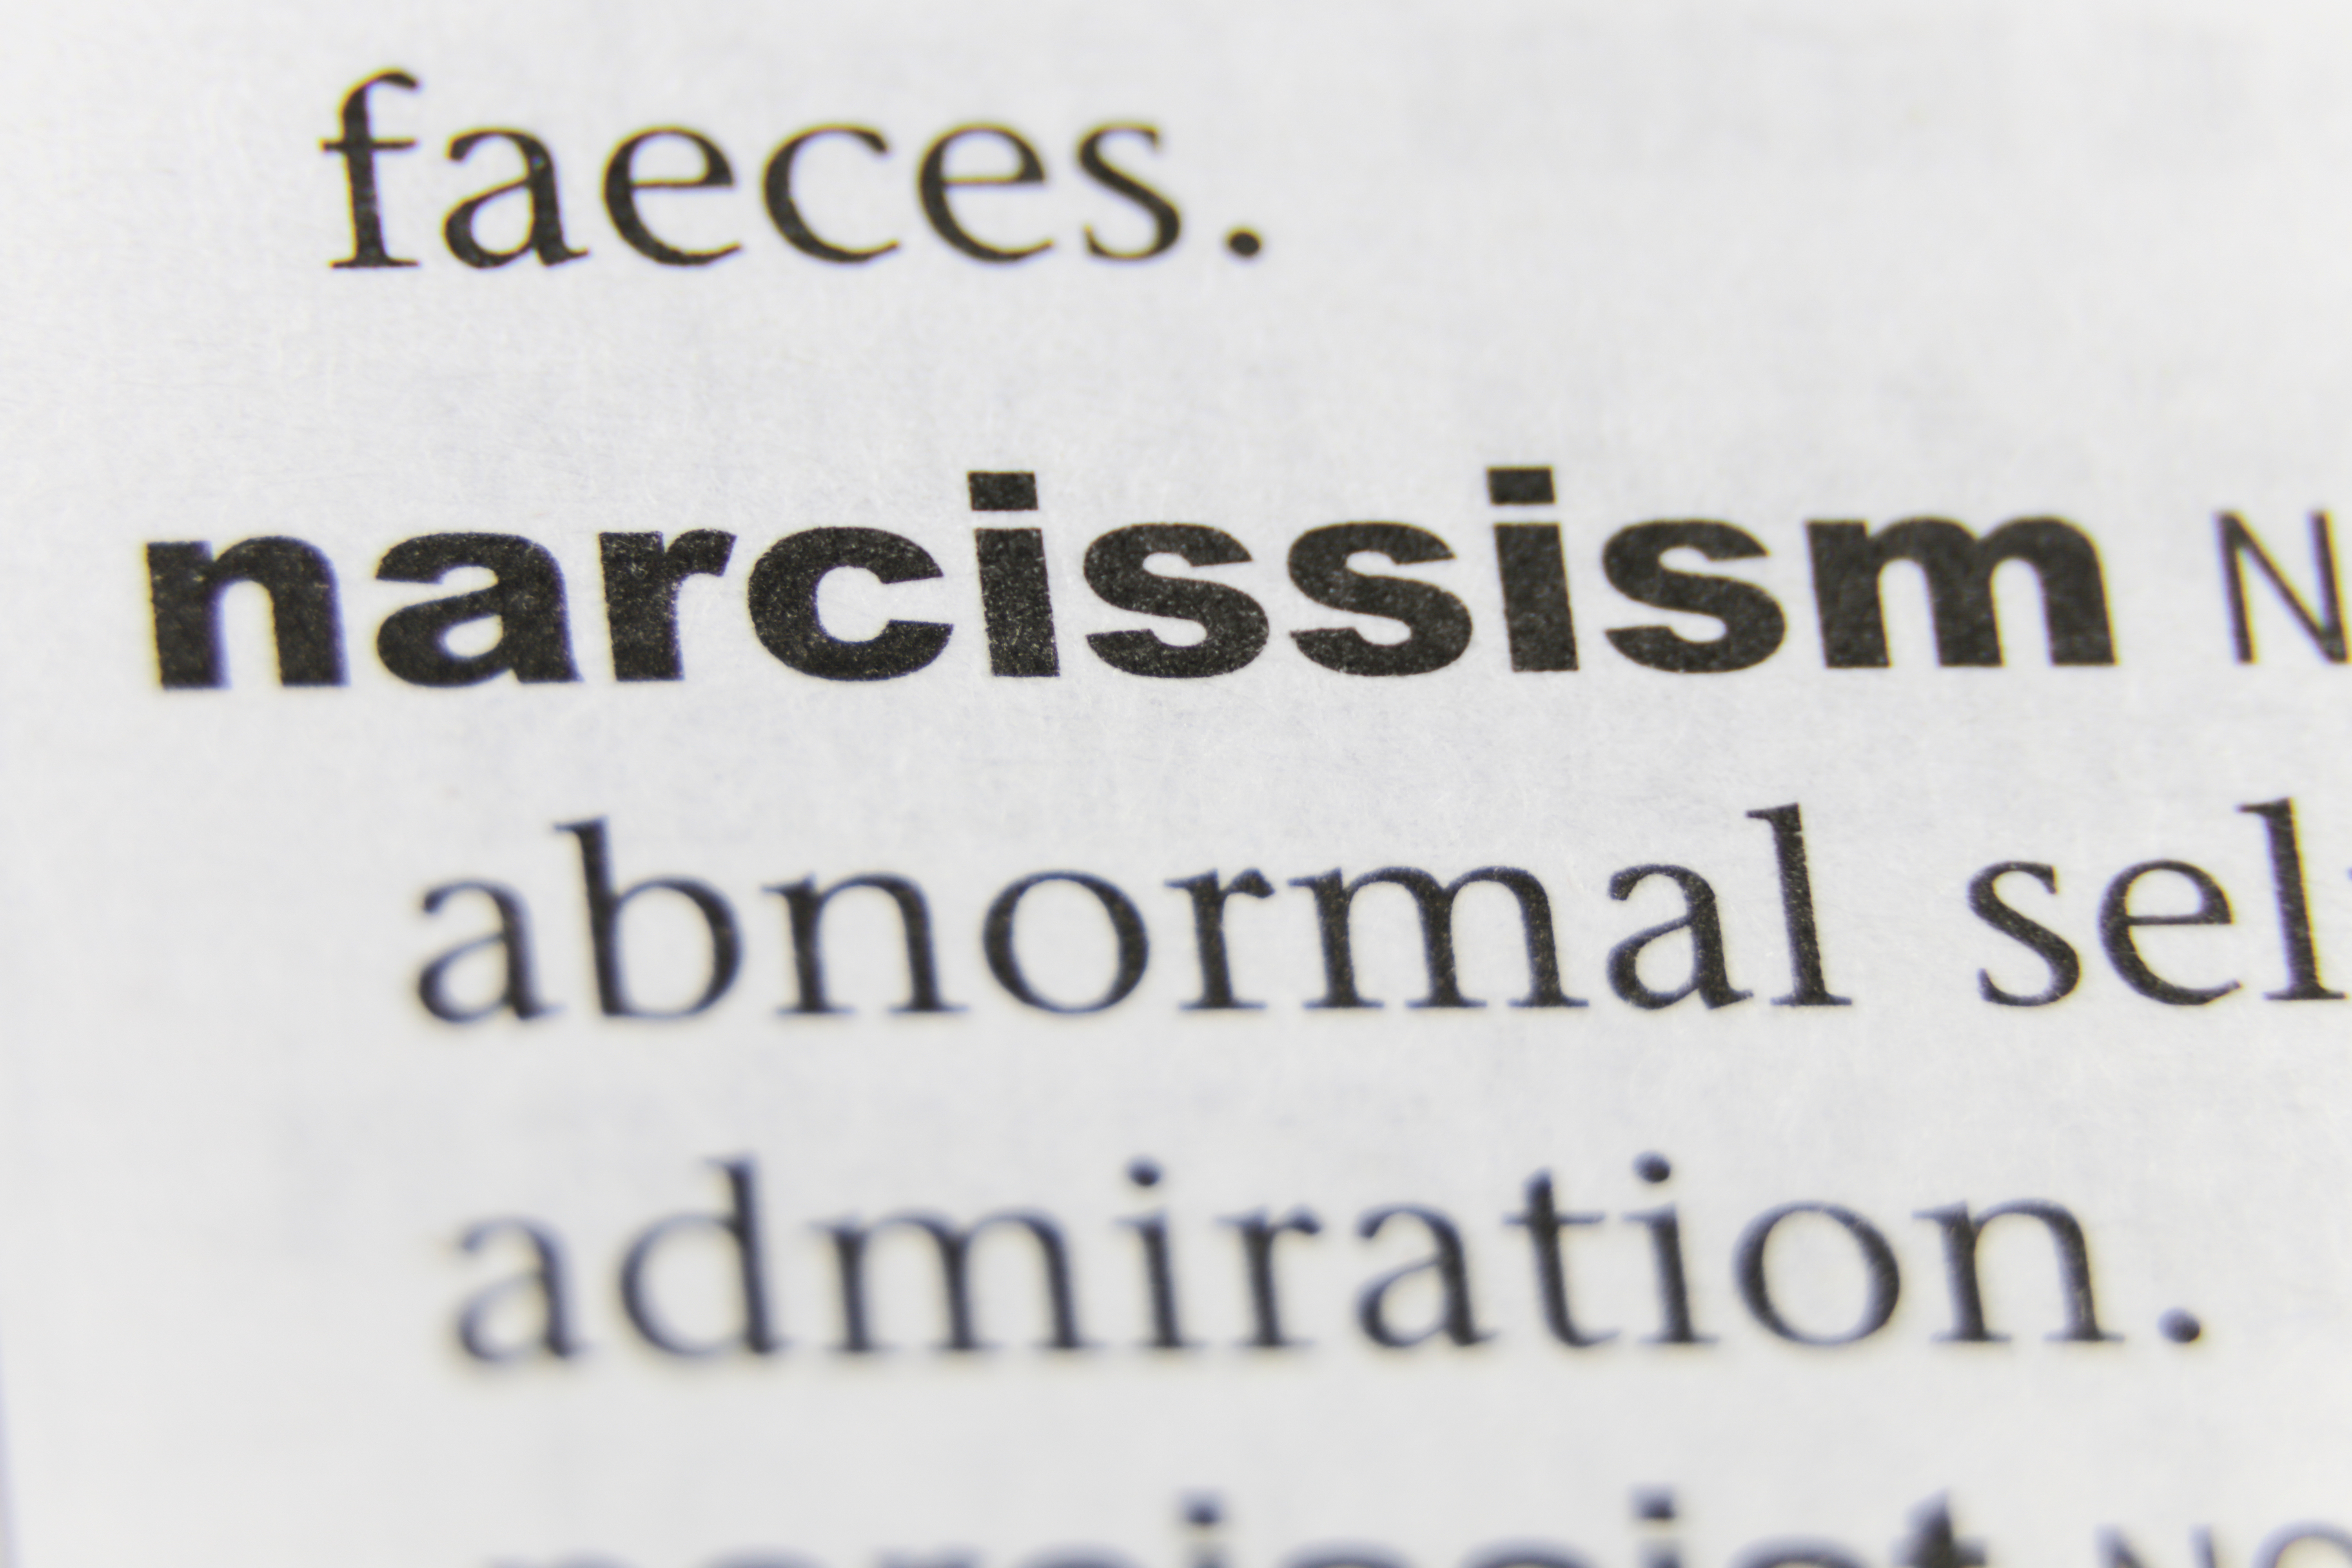 The word narcissism taken from a dictionary